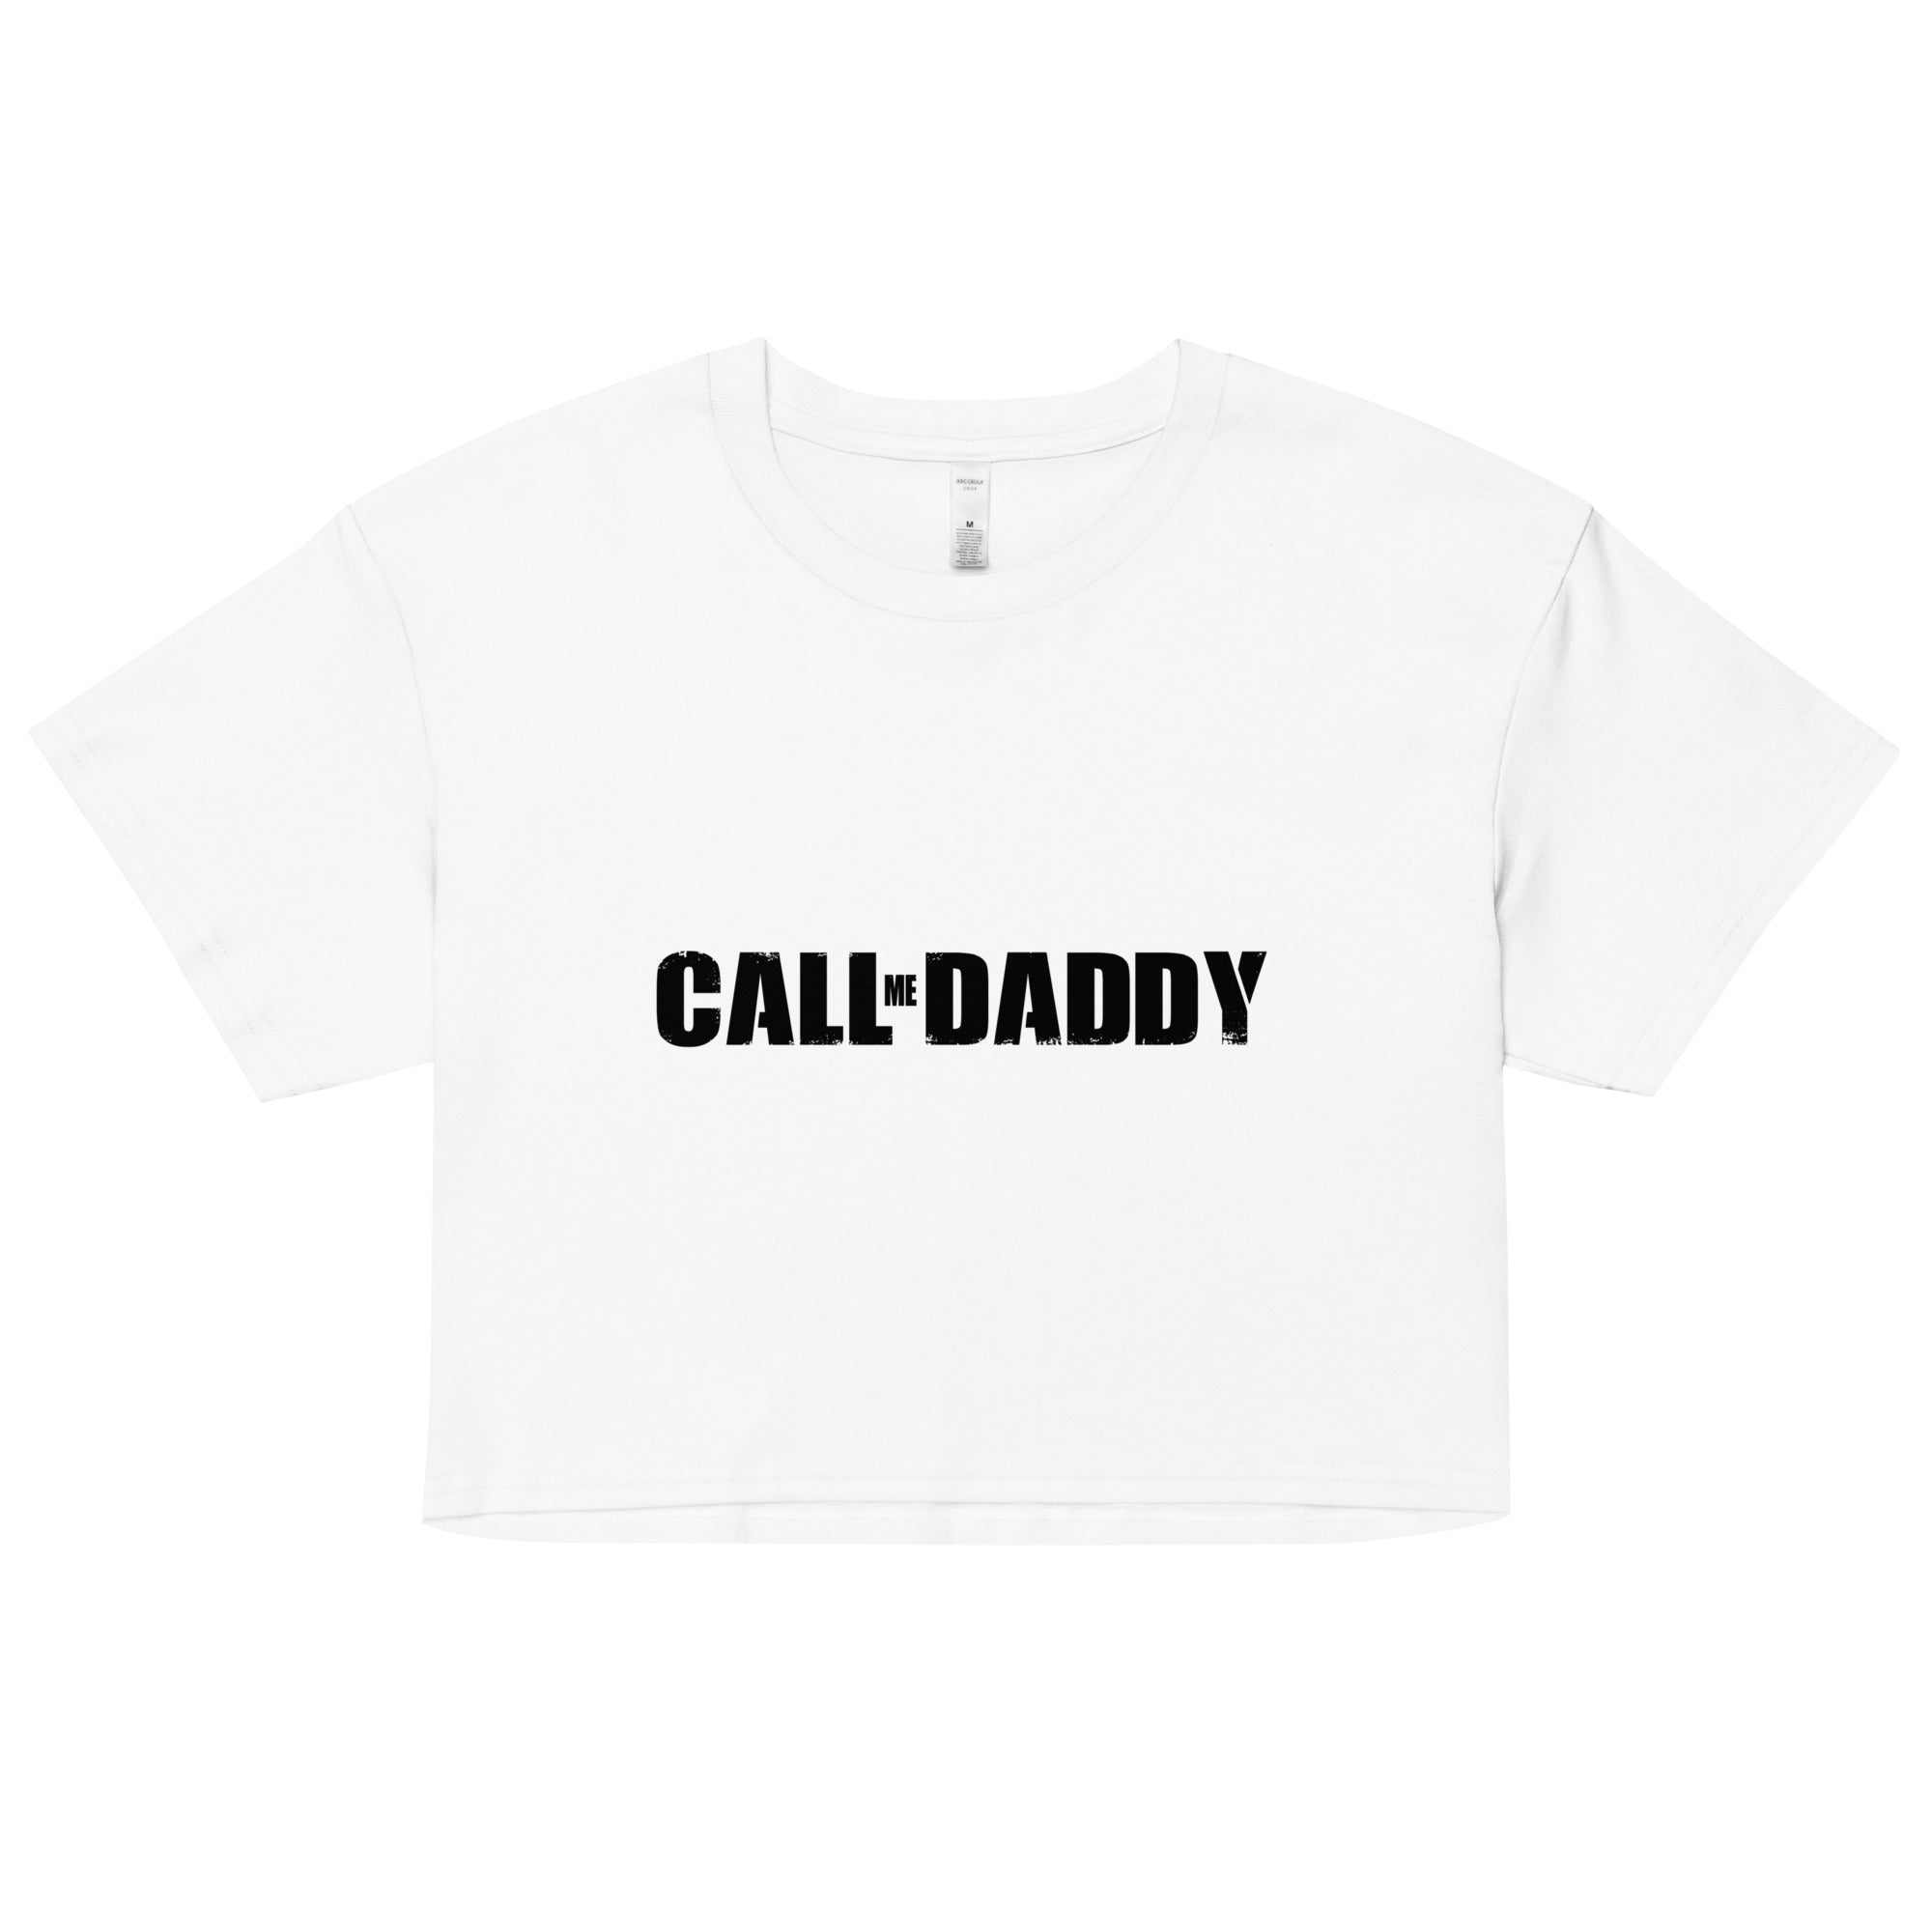 Call Me Daddy crop top